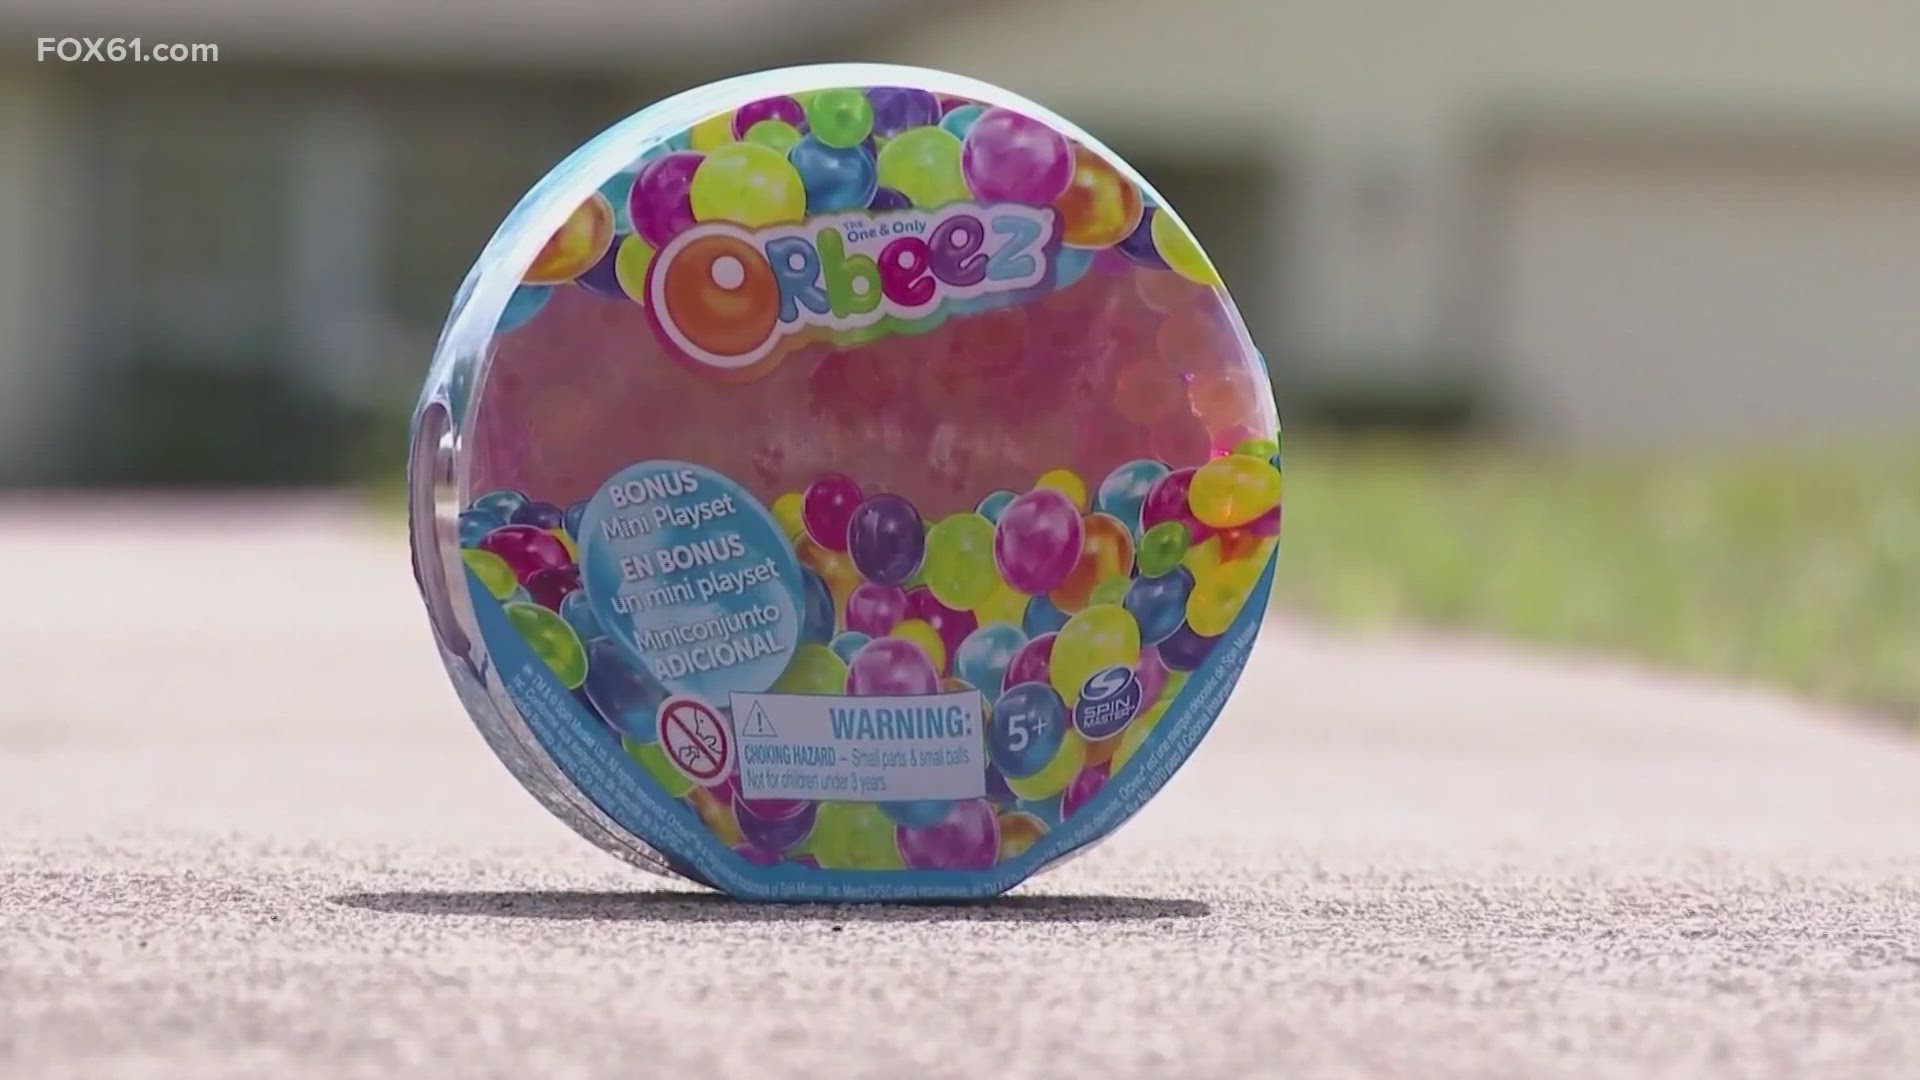 Officials say devices like the Orbeez can cause serious harm to individuals that use them.